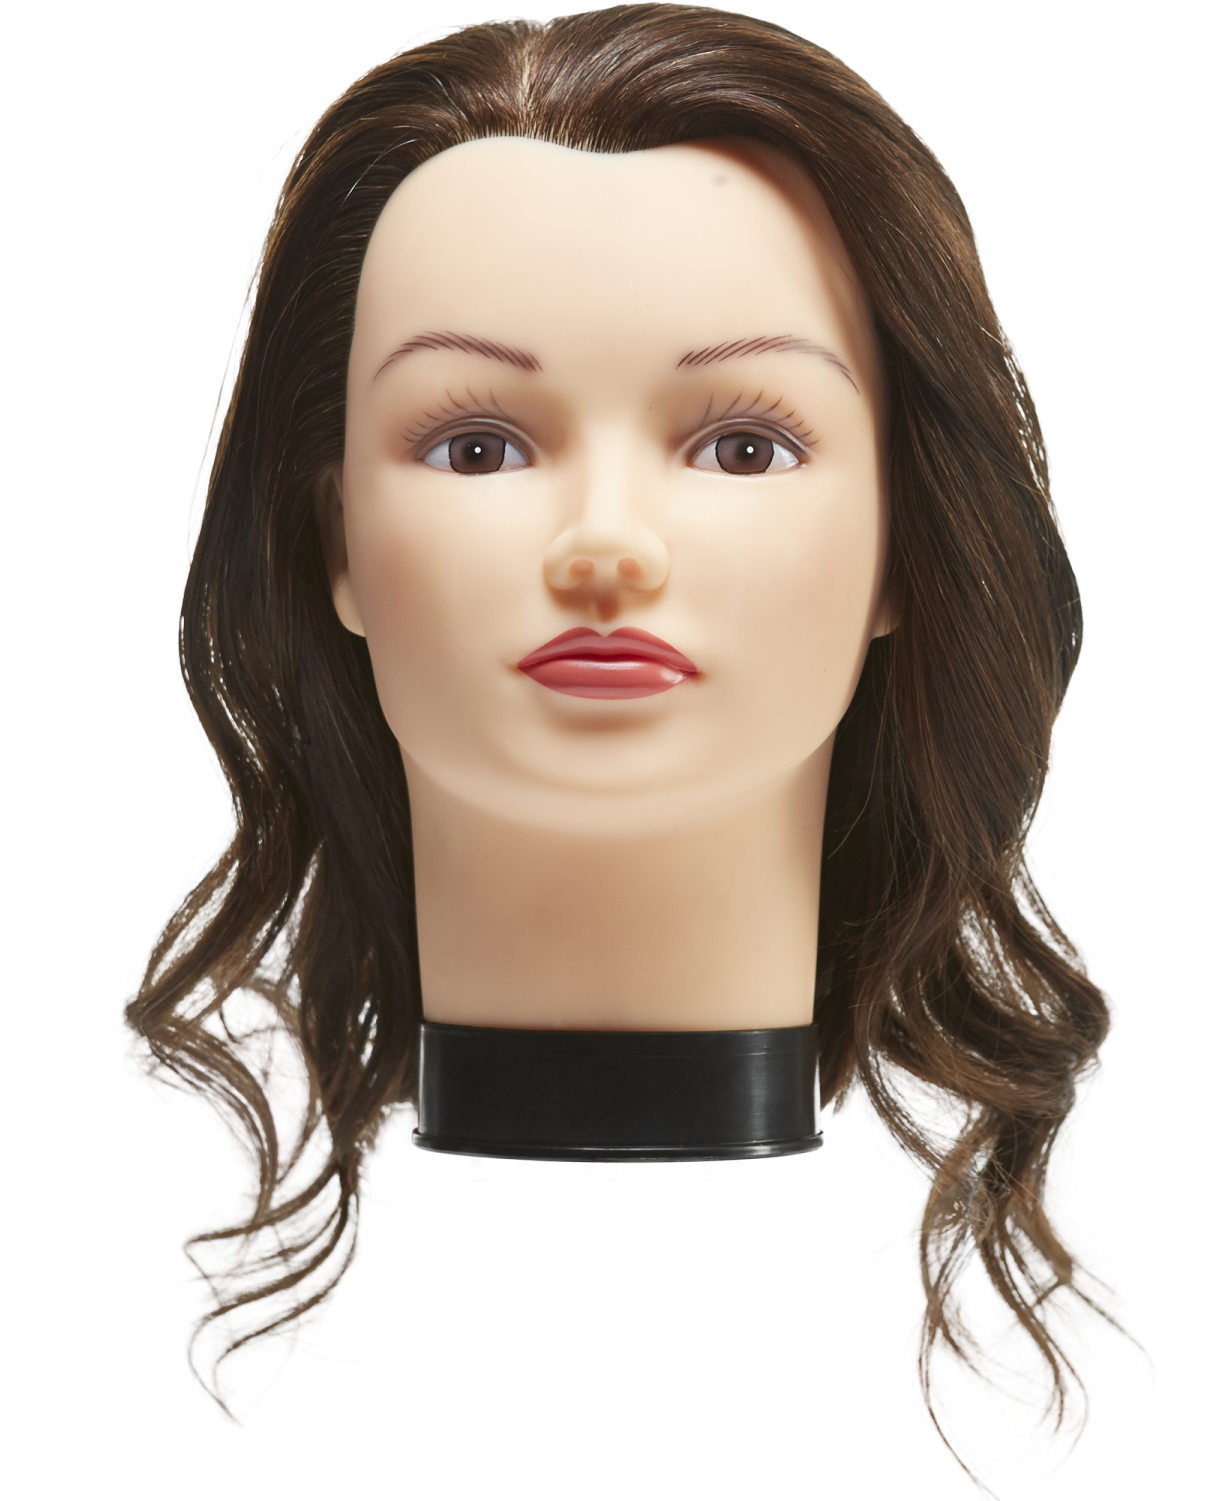 A Mannequin Head With A Black Collar